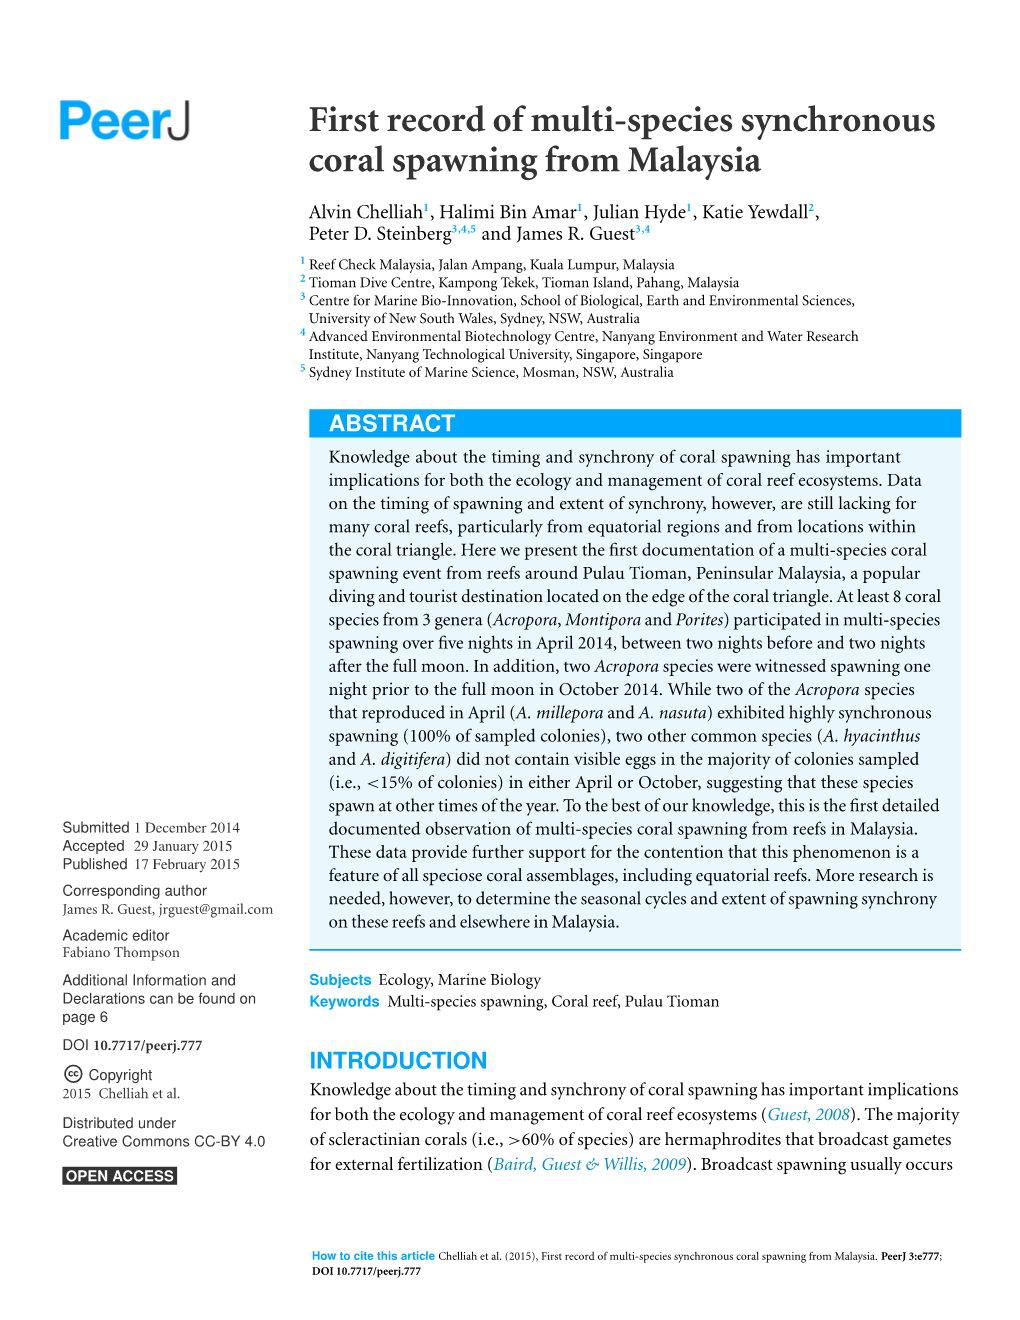 First Record of Multi-Species Synchronous Coral Spawning from Malaysia